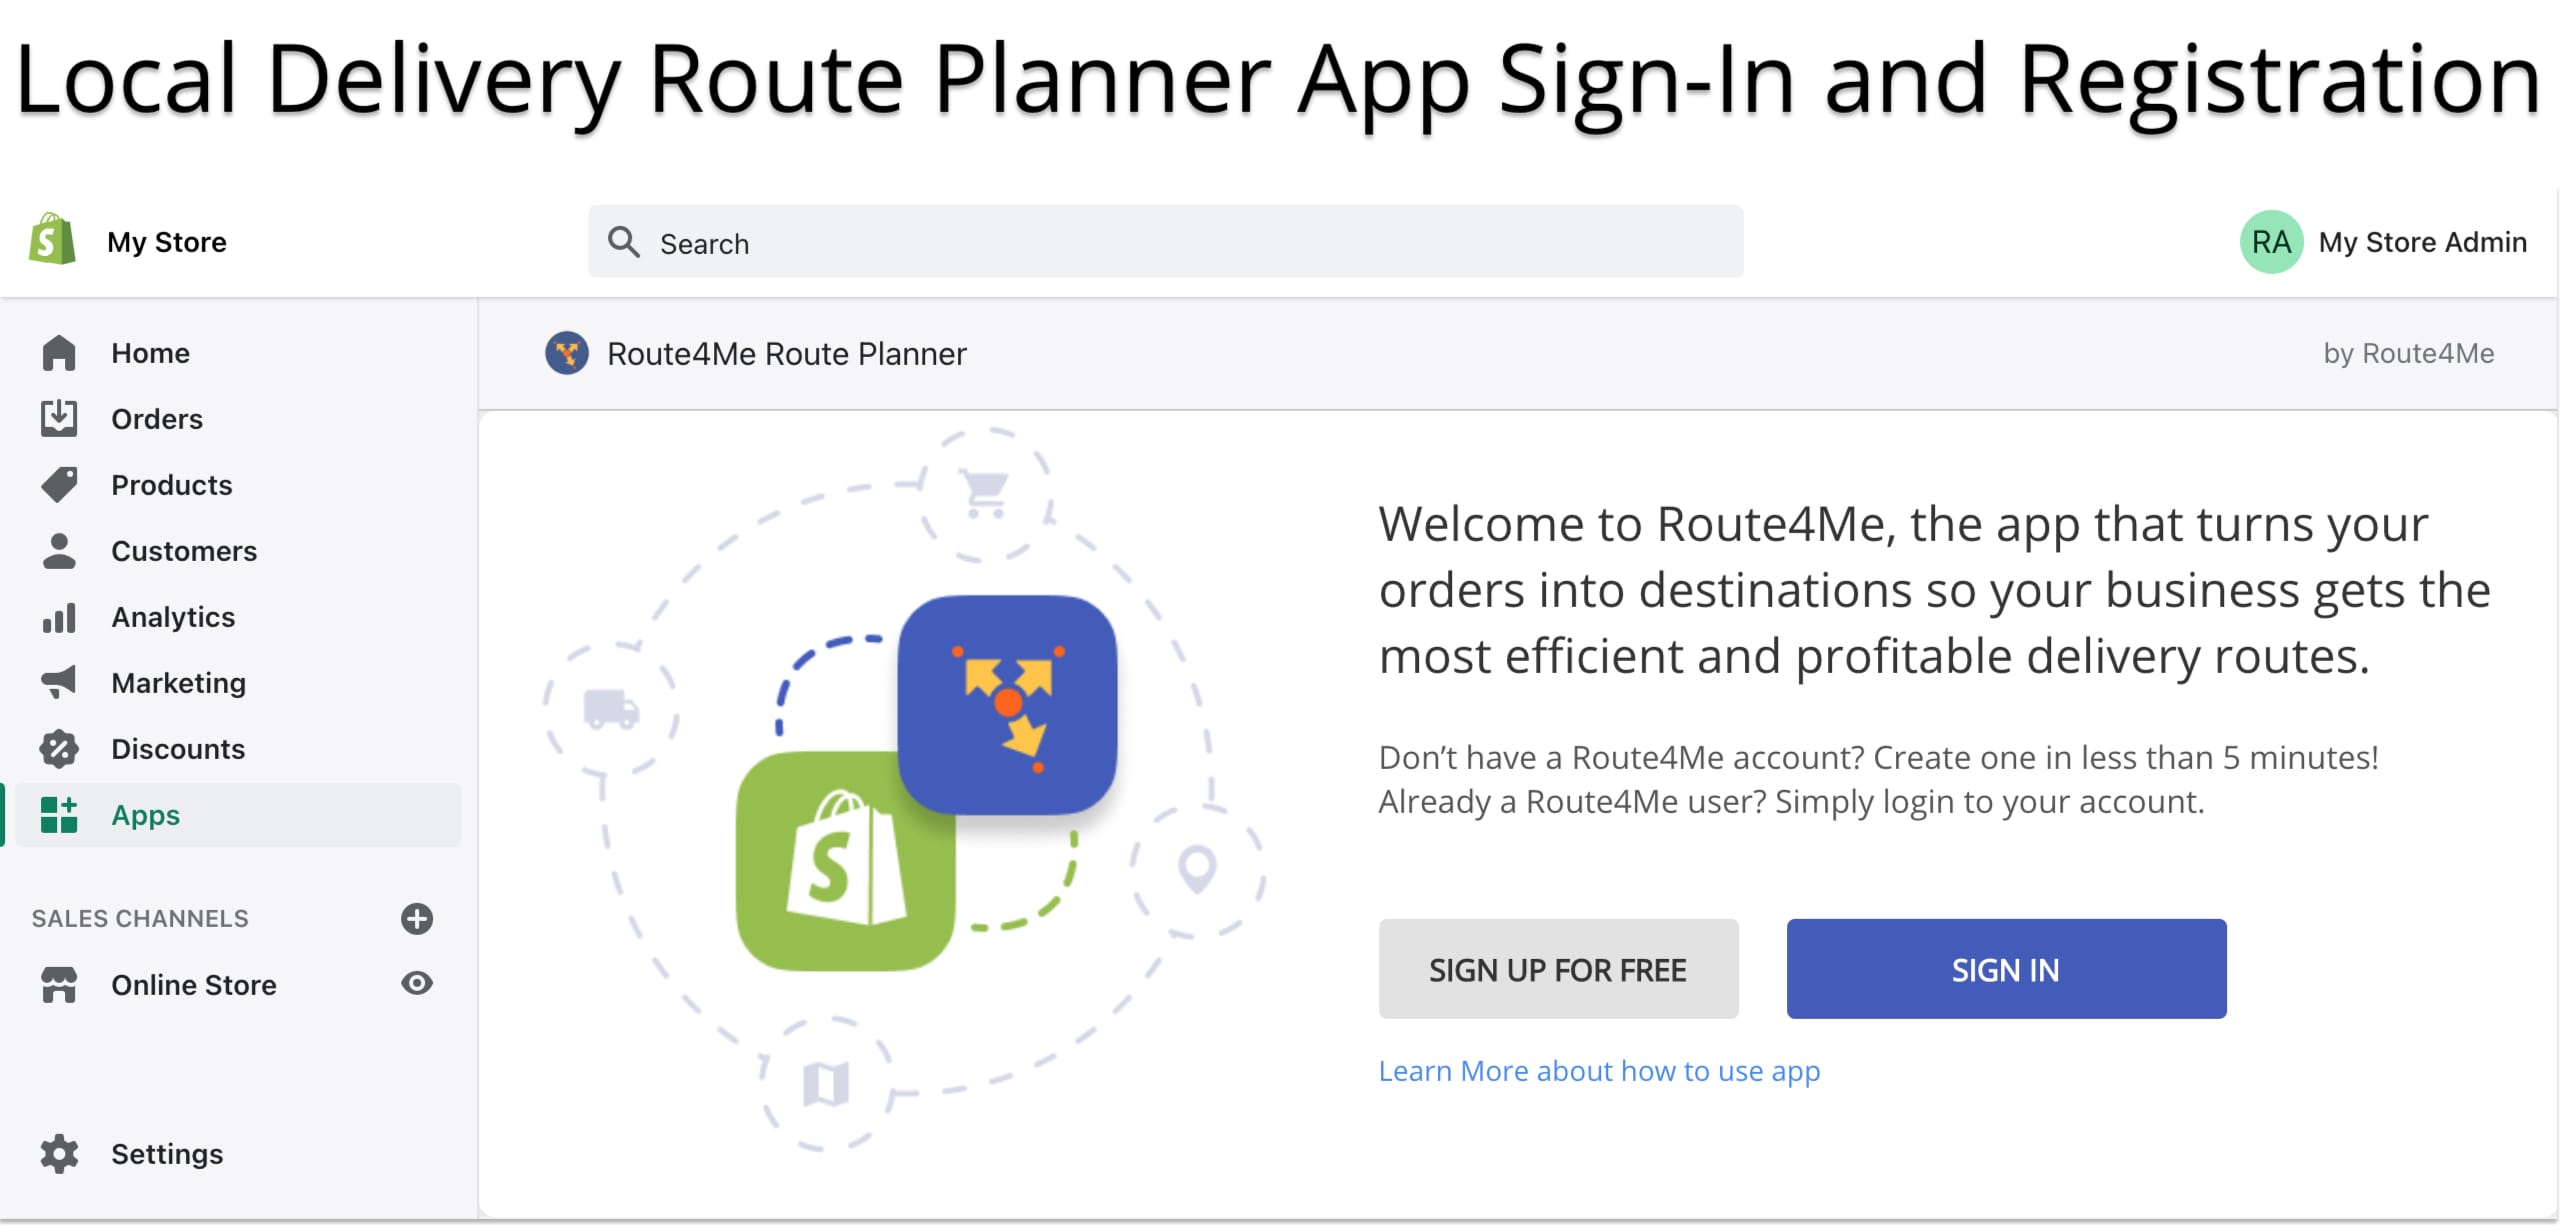 Log in or create a new Shopify route planner for local delivery subscription and Route4Me account.